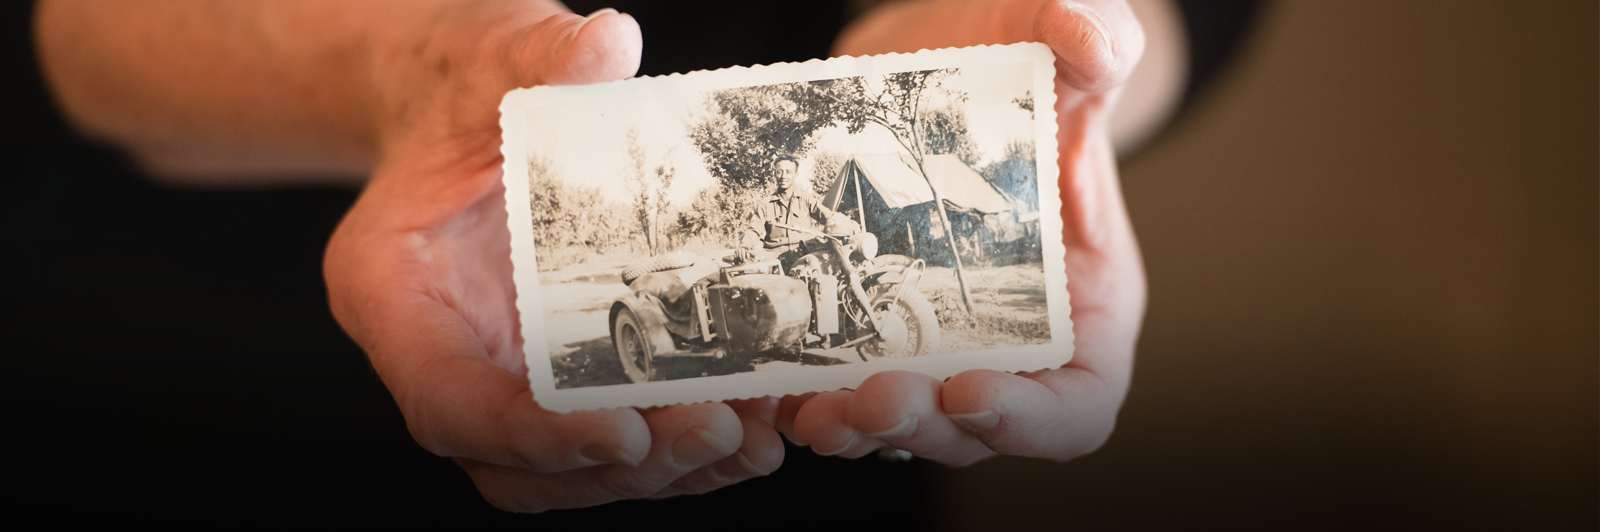 Nelwyn Landreth's hands are seen holding a photo of her father, Roy Thomas "Smiley" Pruitt. In the picture he's sitting on a motorcycle.